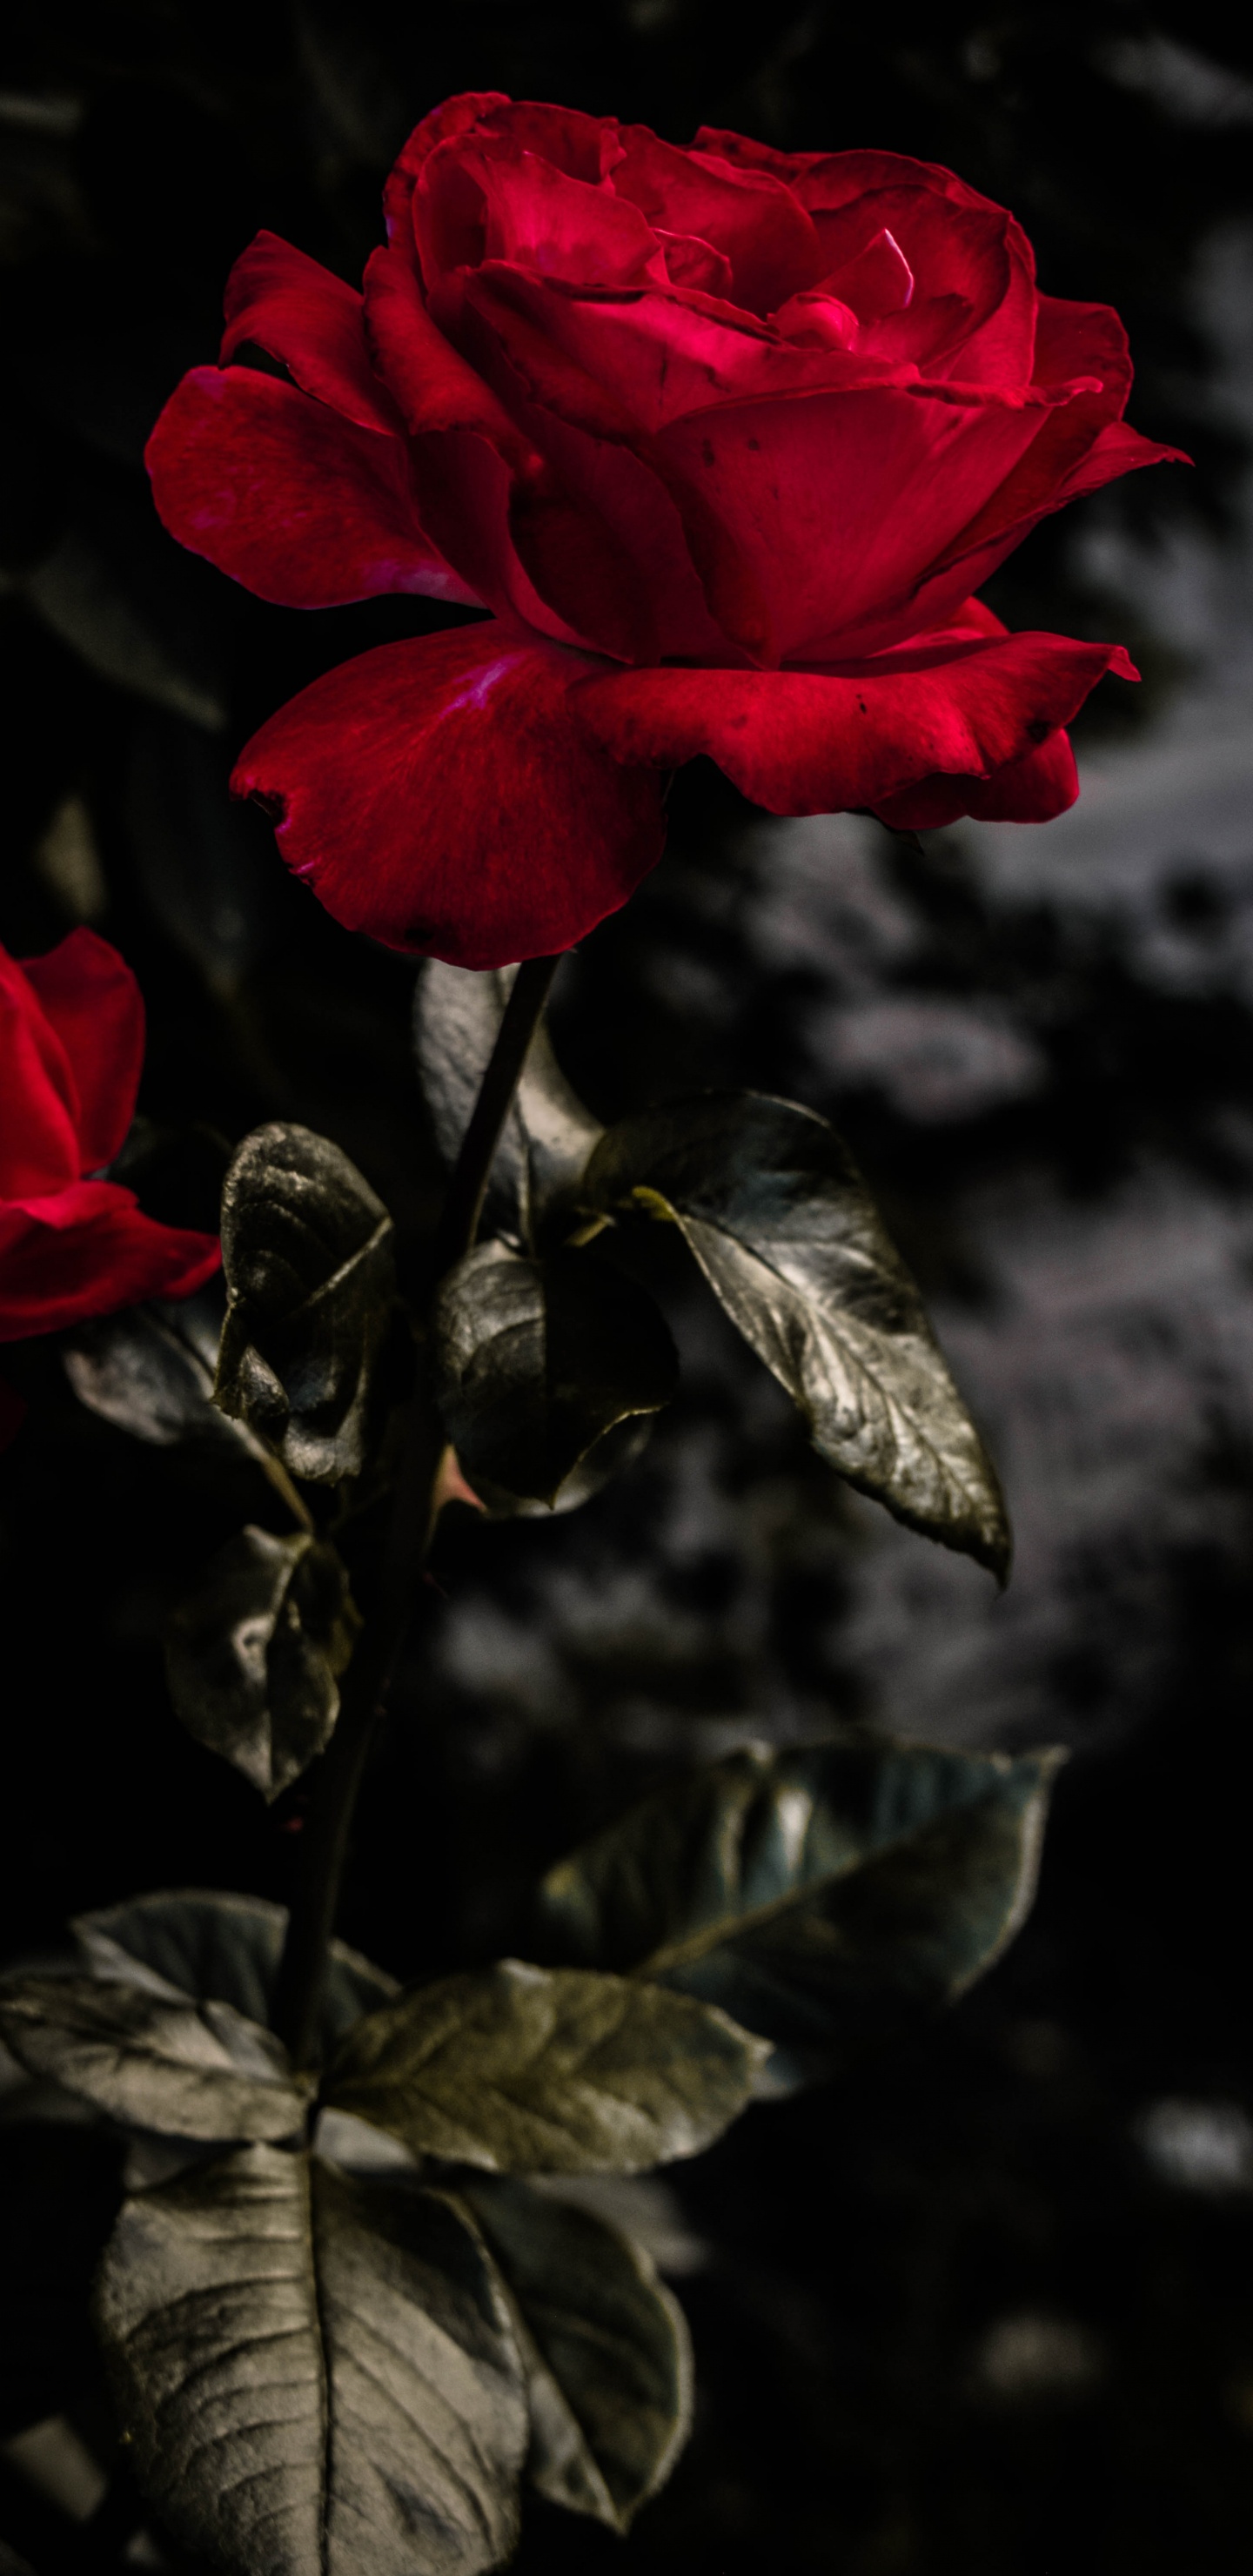 Red Rose in Bloom During Daytime. Wallpaper in 1440x2960 Resolution